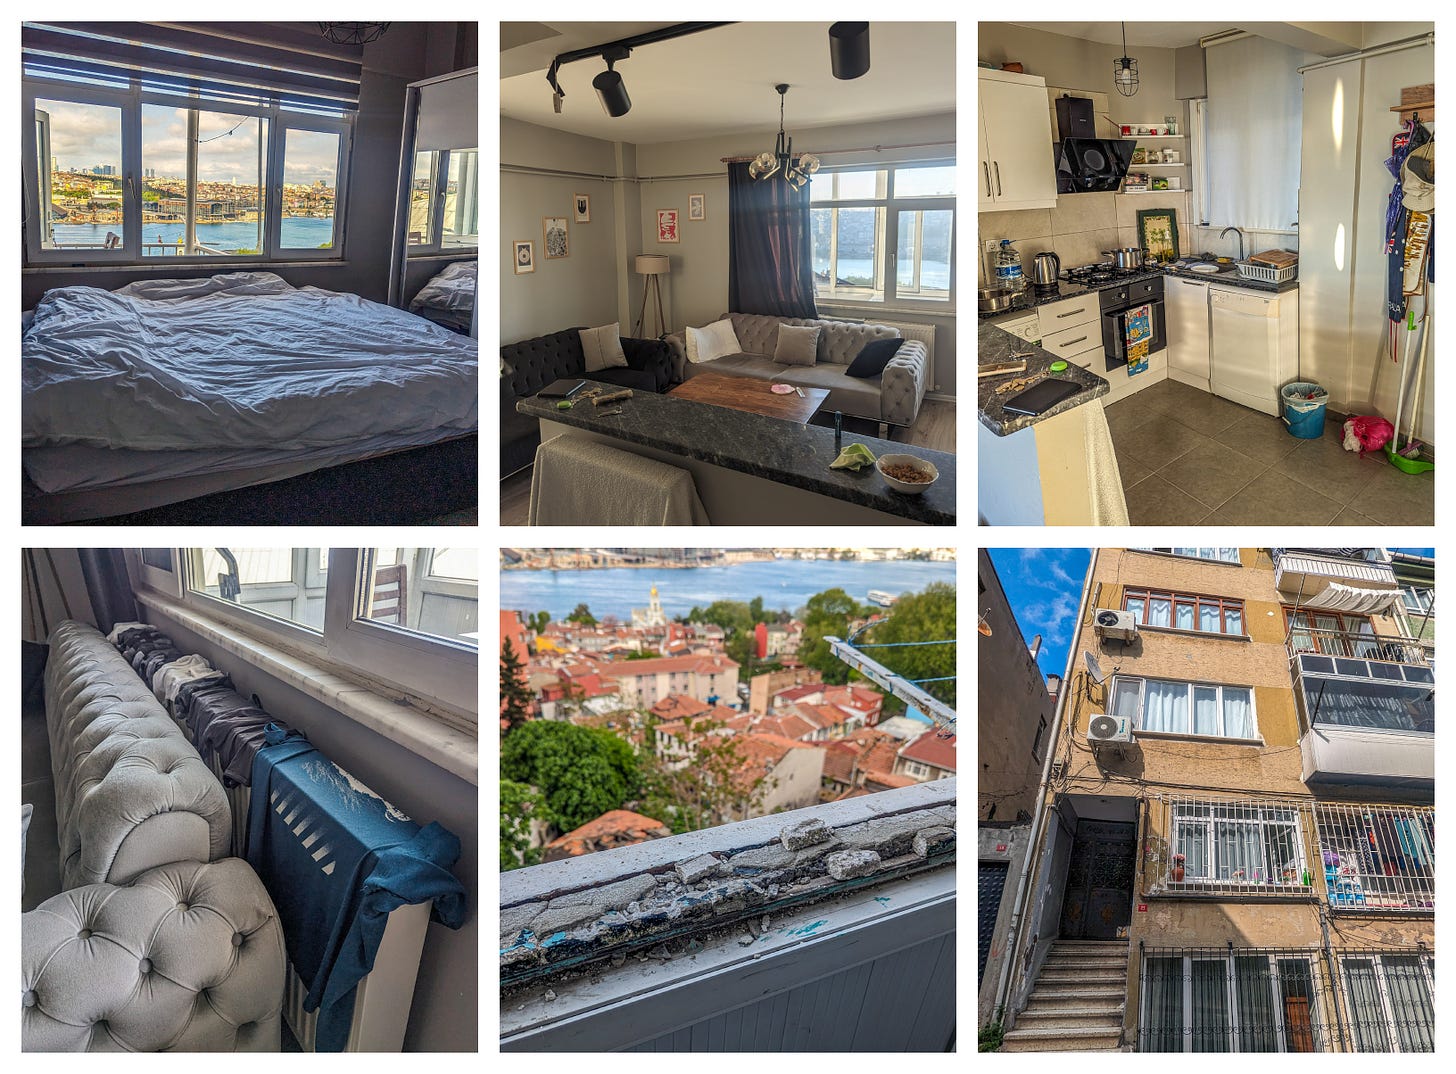 Six photos showing our Airbnb including the bedroom, clothes drying on the radiator, and the outside of the building. 